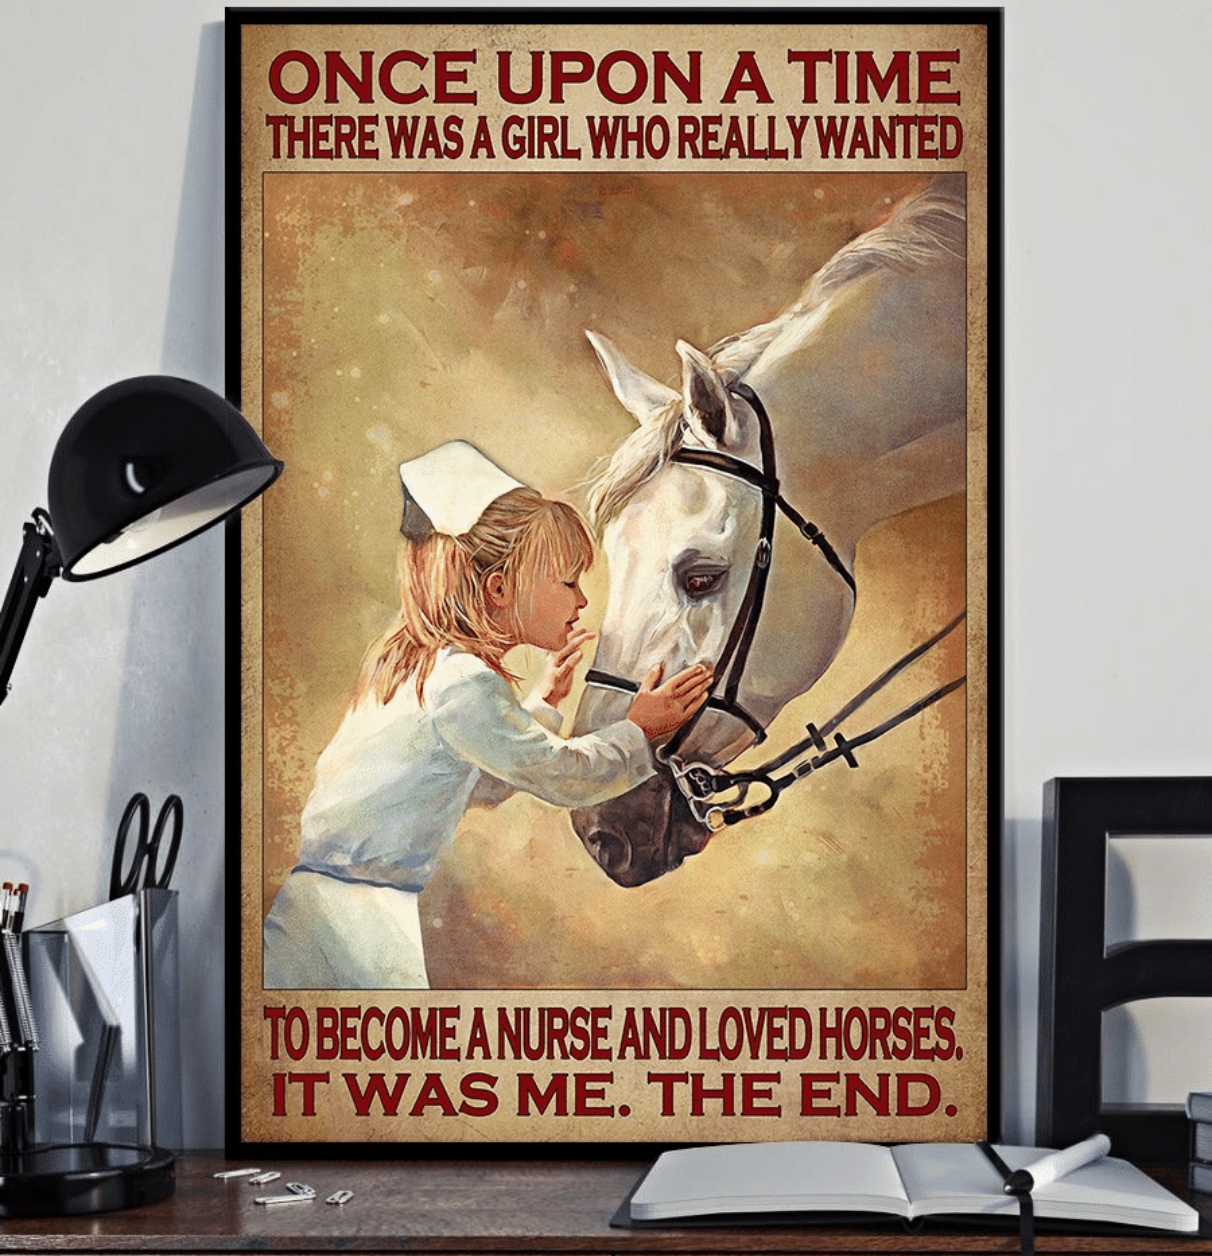 Once Upon A Time There Was A Girl Who Really Wanted To become A Nurse And Loved Horses